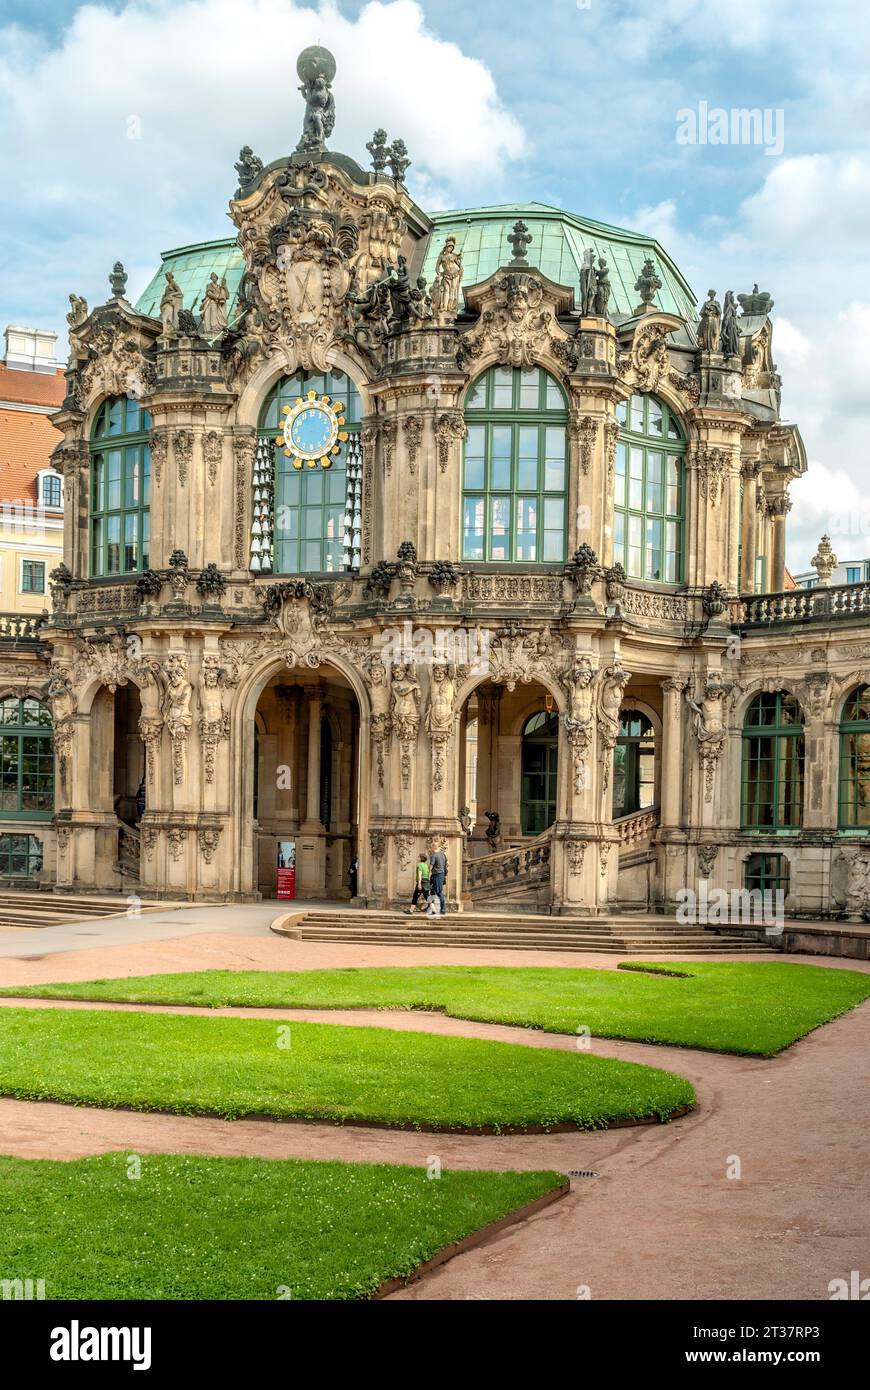 Bell Chime and entrance to the Porcelain Collection at the Zwinger Palace, Dresden, Germany Stock Photo